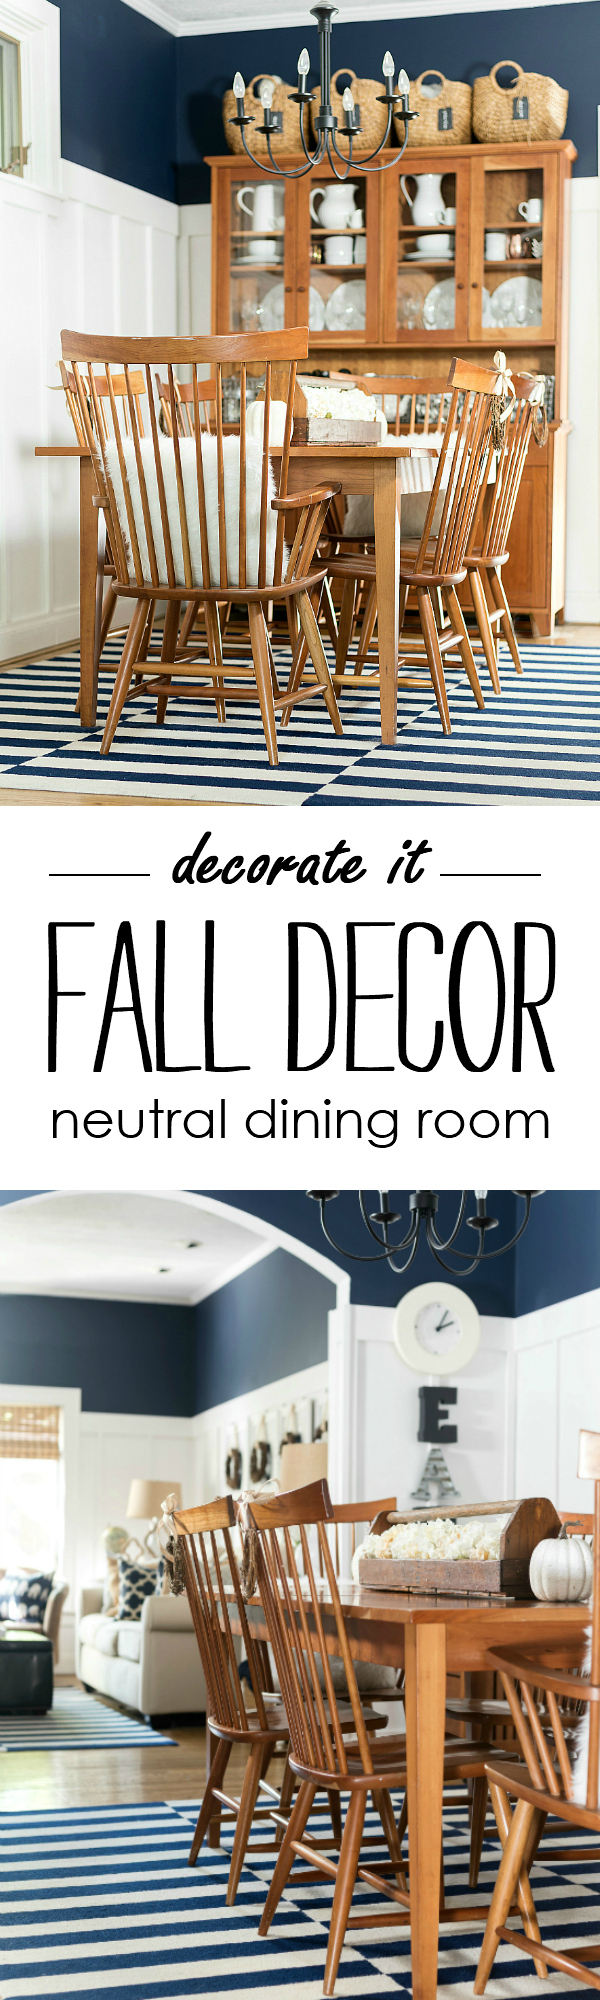 Fall Dining Room Decor - Fall Decorating in Neutrals - Navy, White, Neutrals for Fall @ITALLSTARTEDWITHPAINT.com